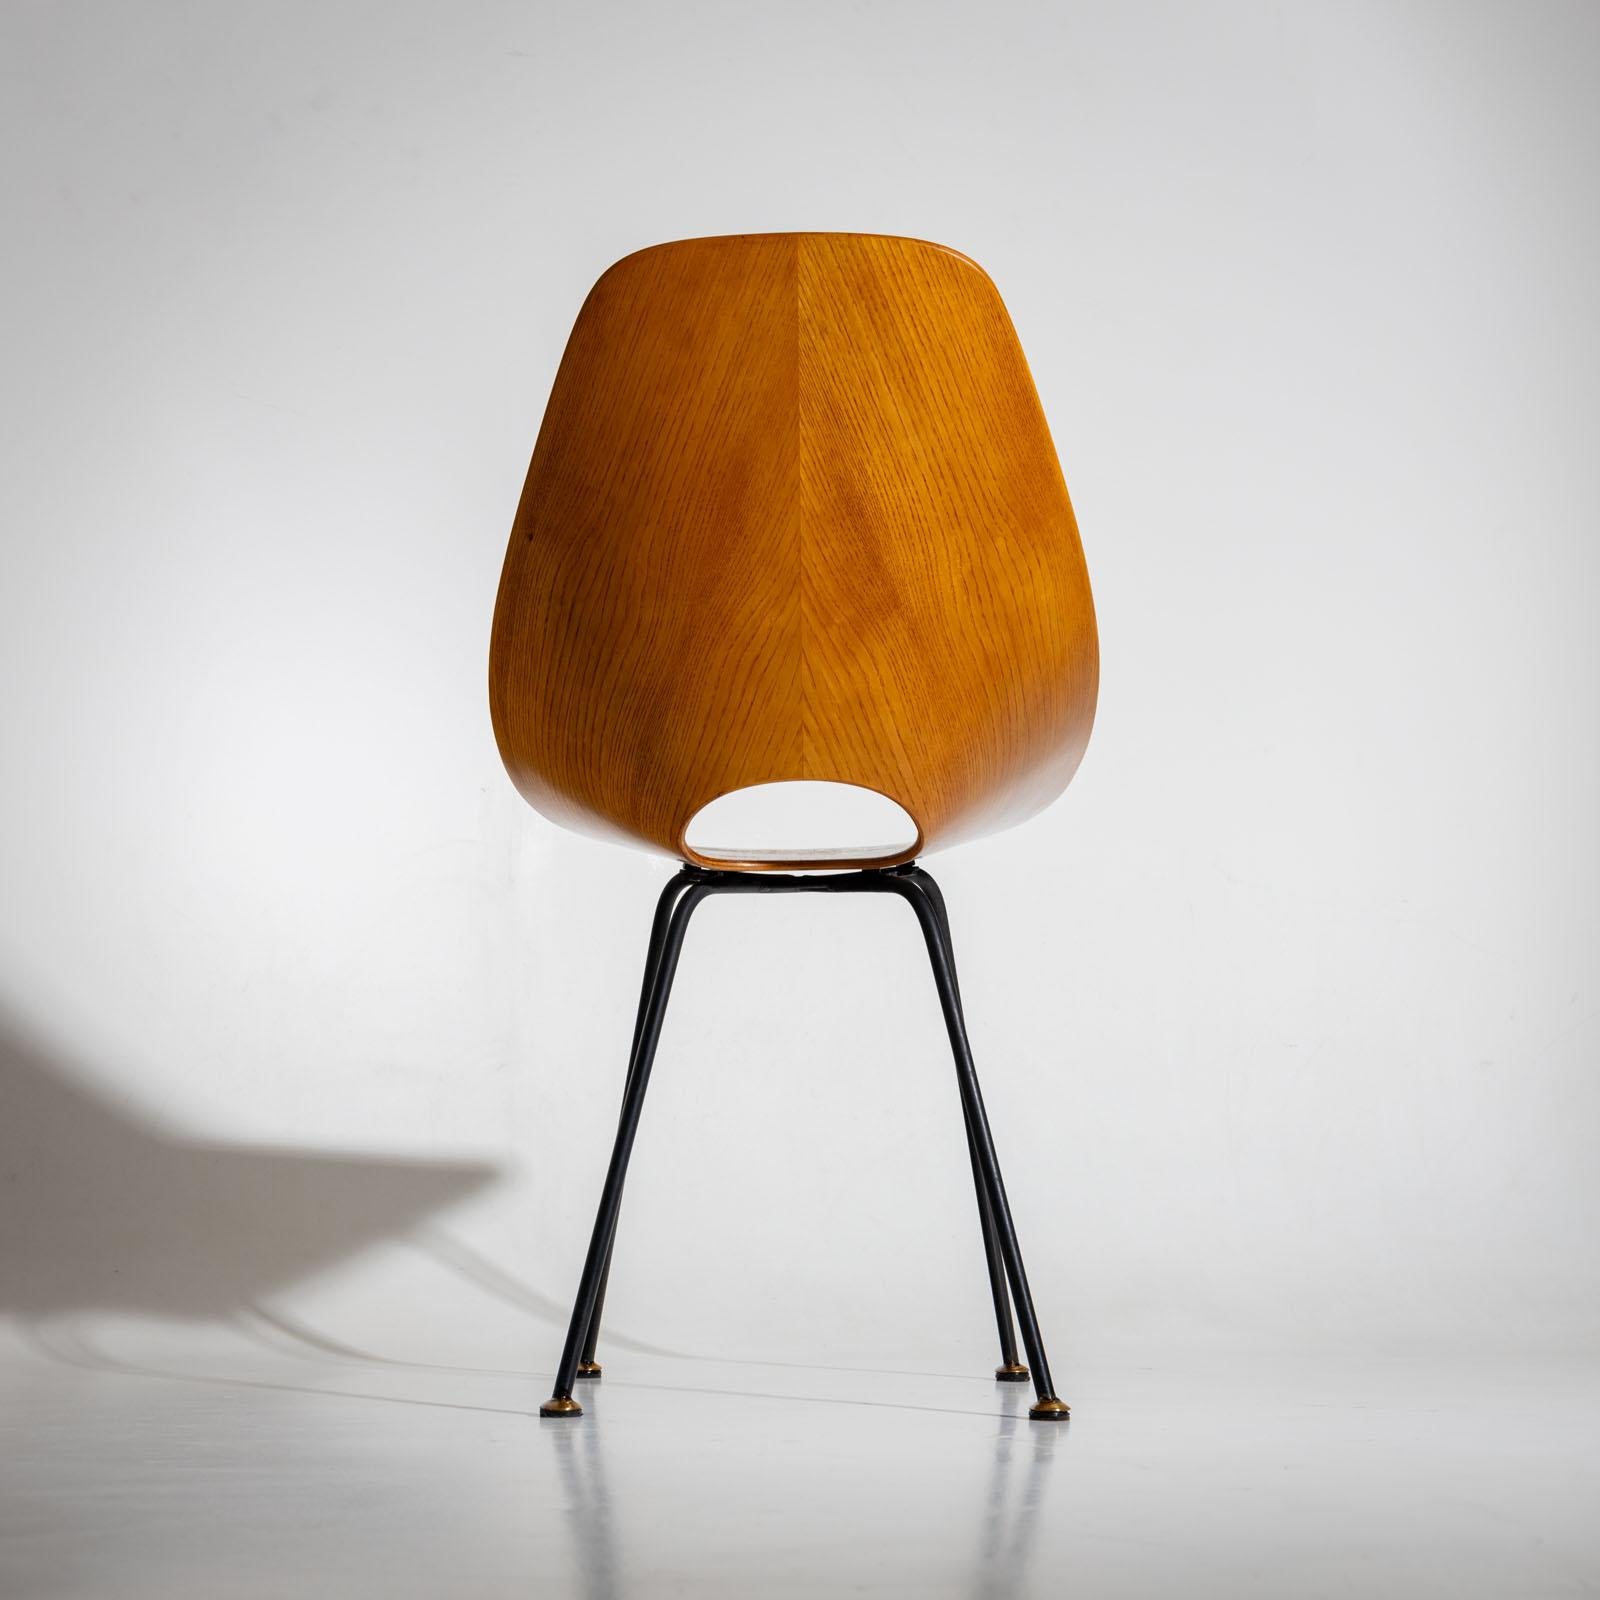 Mid-20th Century 'Medea' Chair by Vittorio Nobili, Italy 1960s For Sale